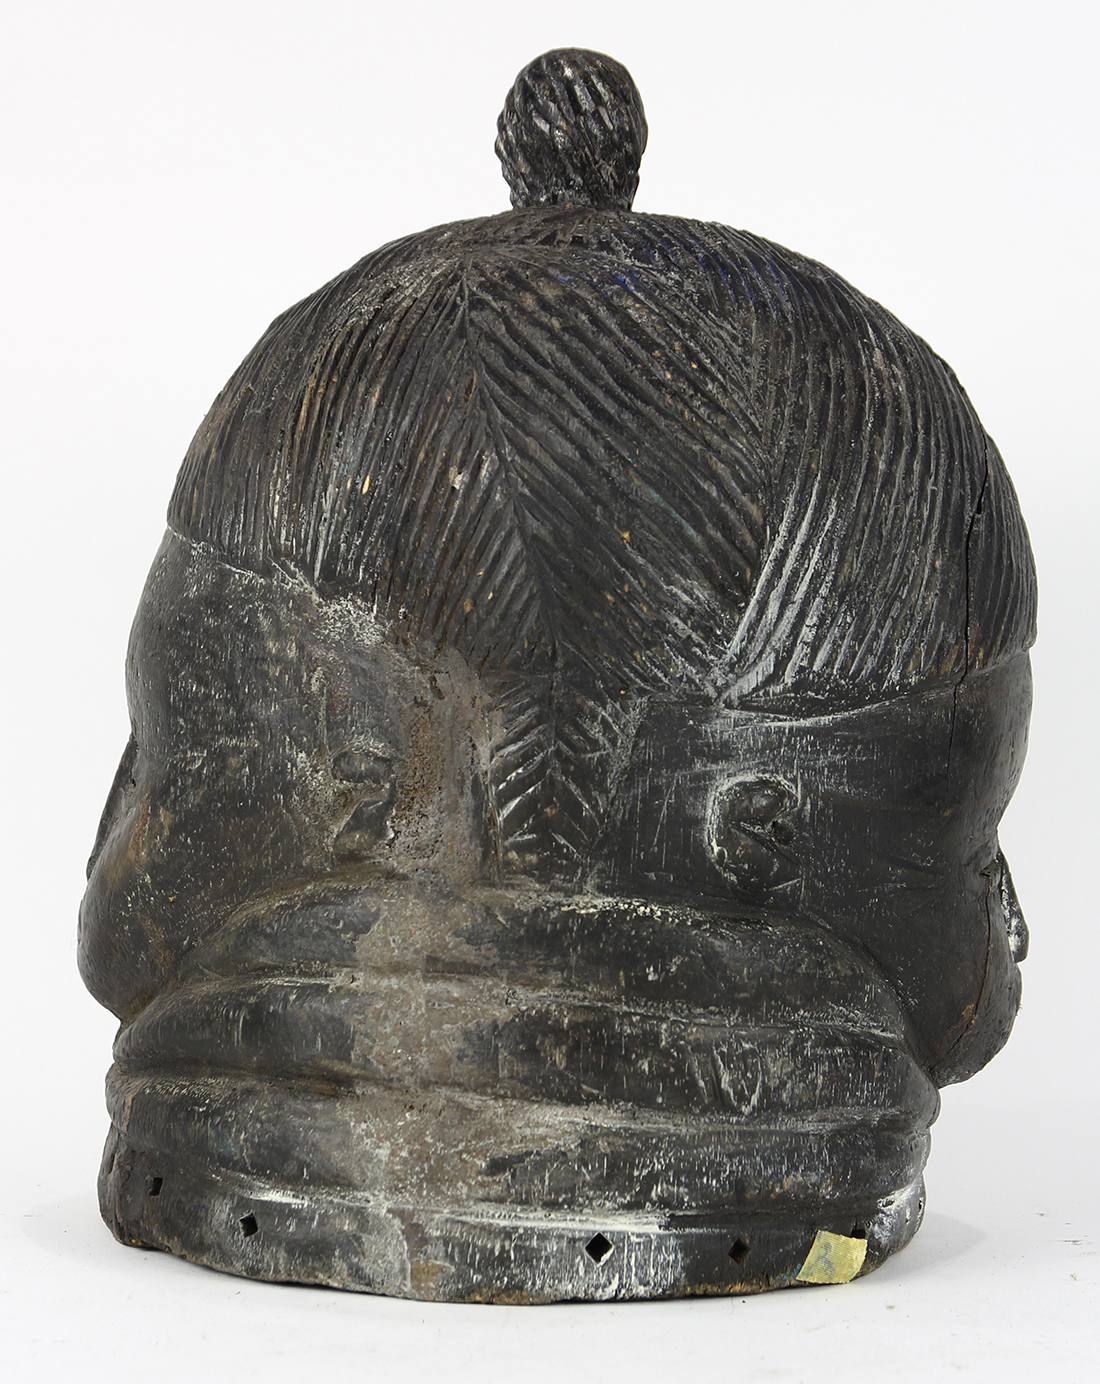 Mende people, Liberia and Sierra Leone, helmet mask, Janus with two faces, 14"h x 9.5"w